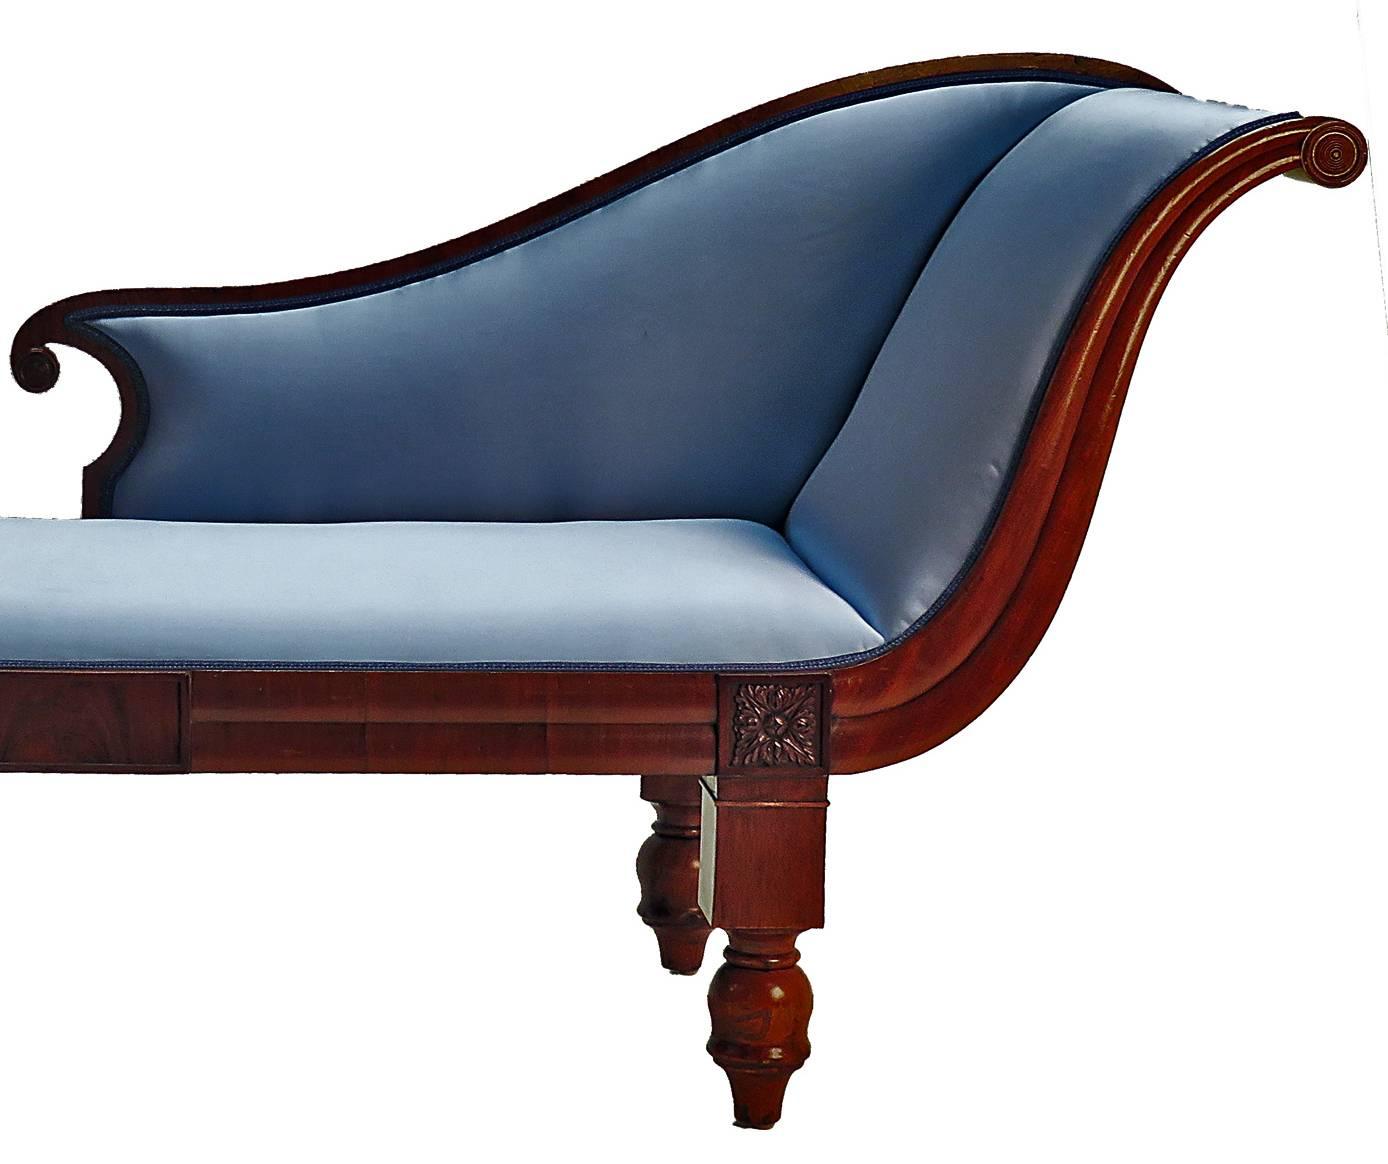 Named for Madam Recamier, the fainting couch was a staple for the homes of the fashionable where the delicate beauty could regain her composure should her corset be too tight. They where styled after pieces painted on ancient Greek and Roman